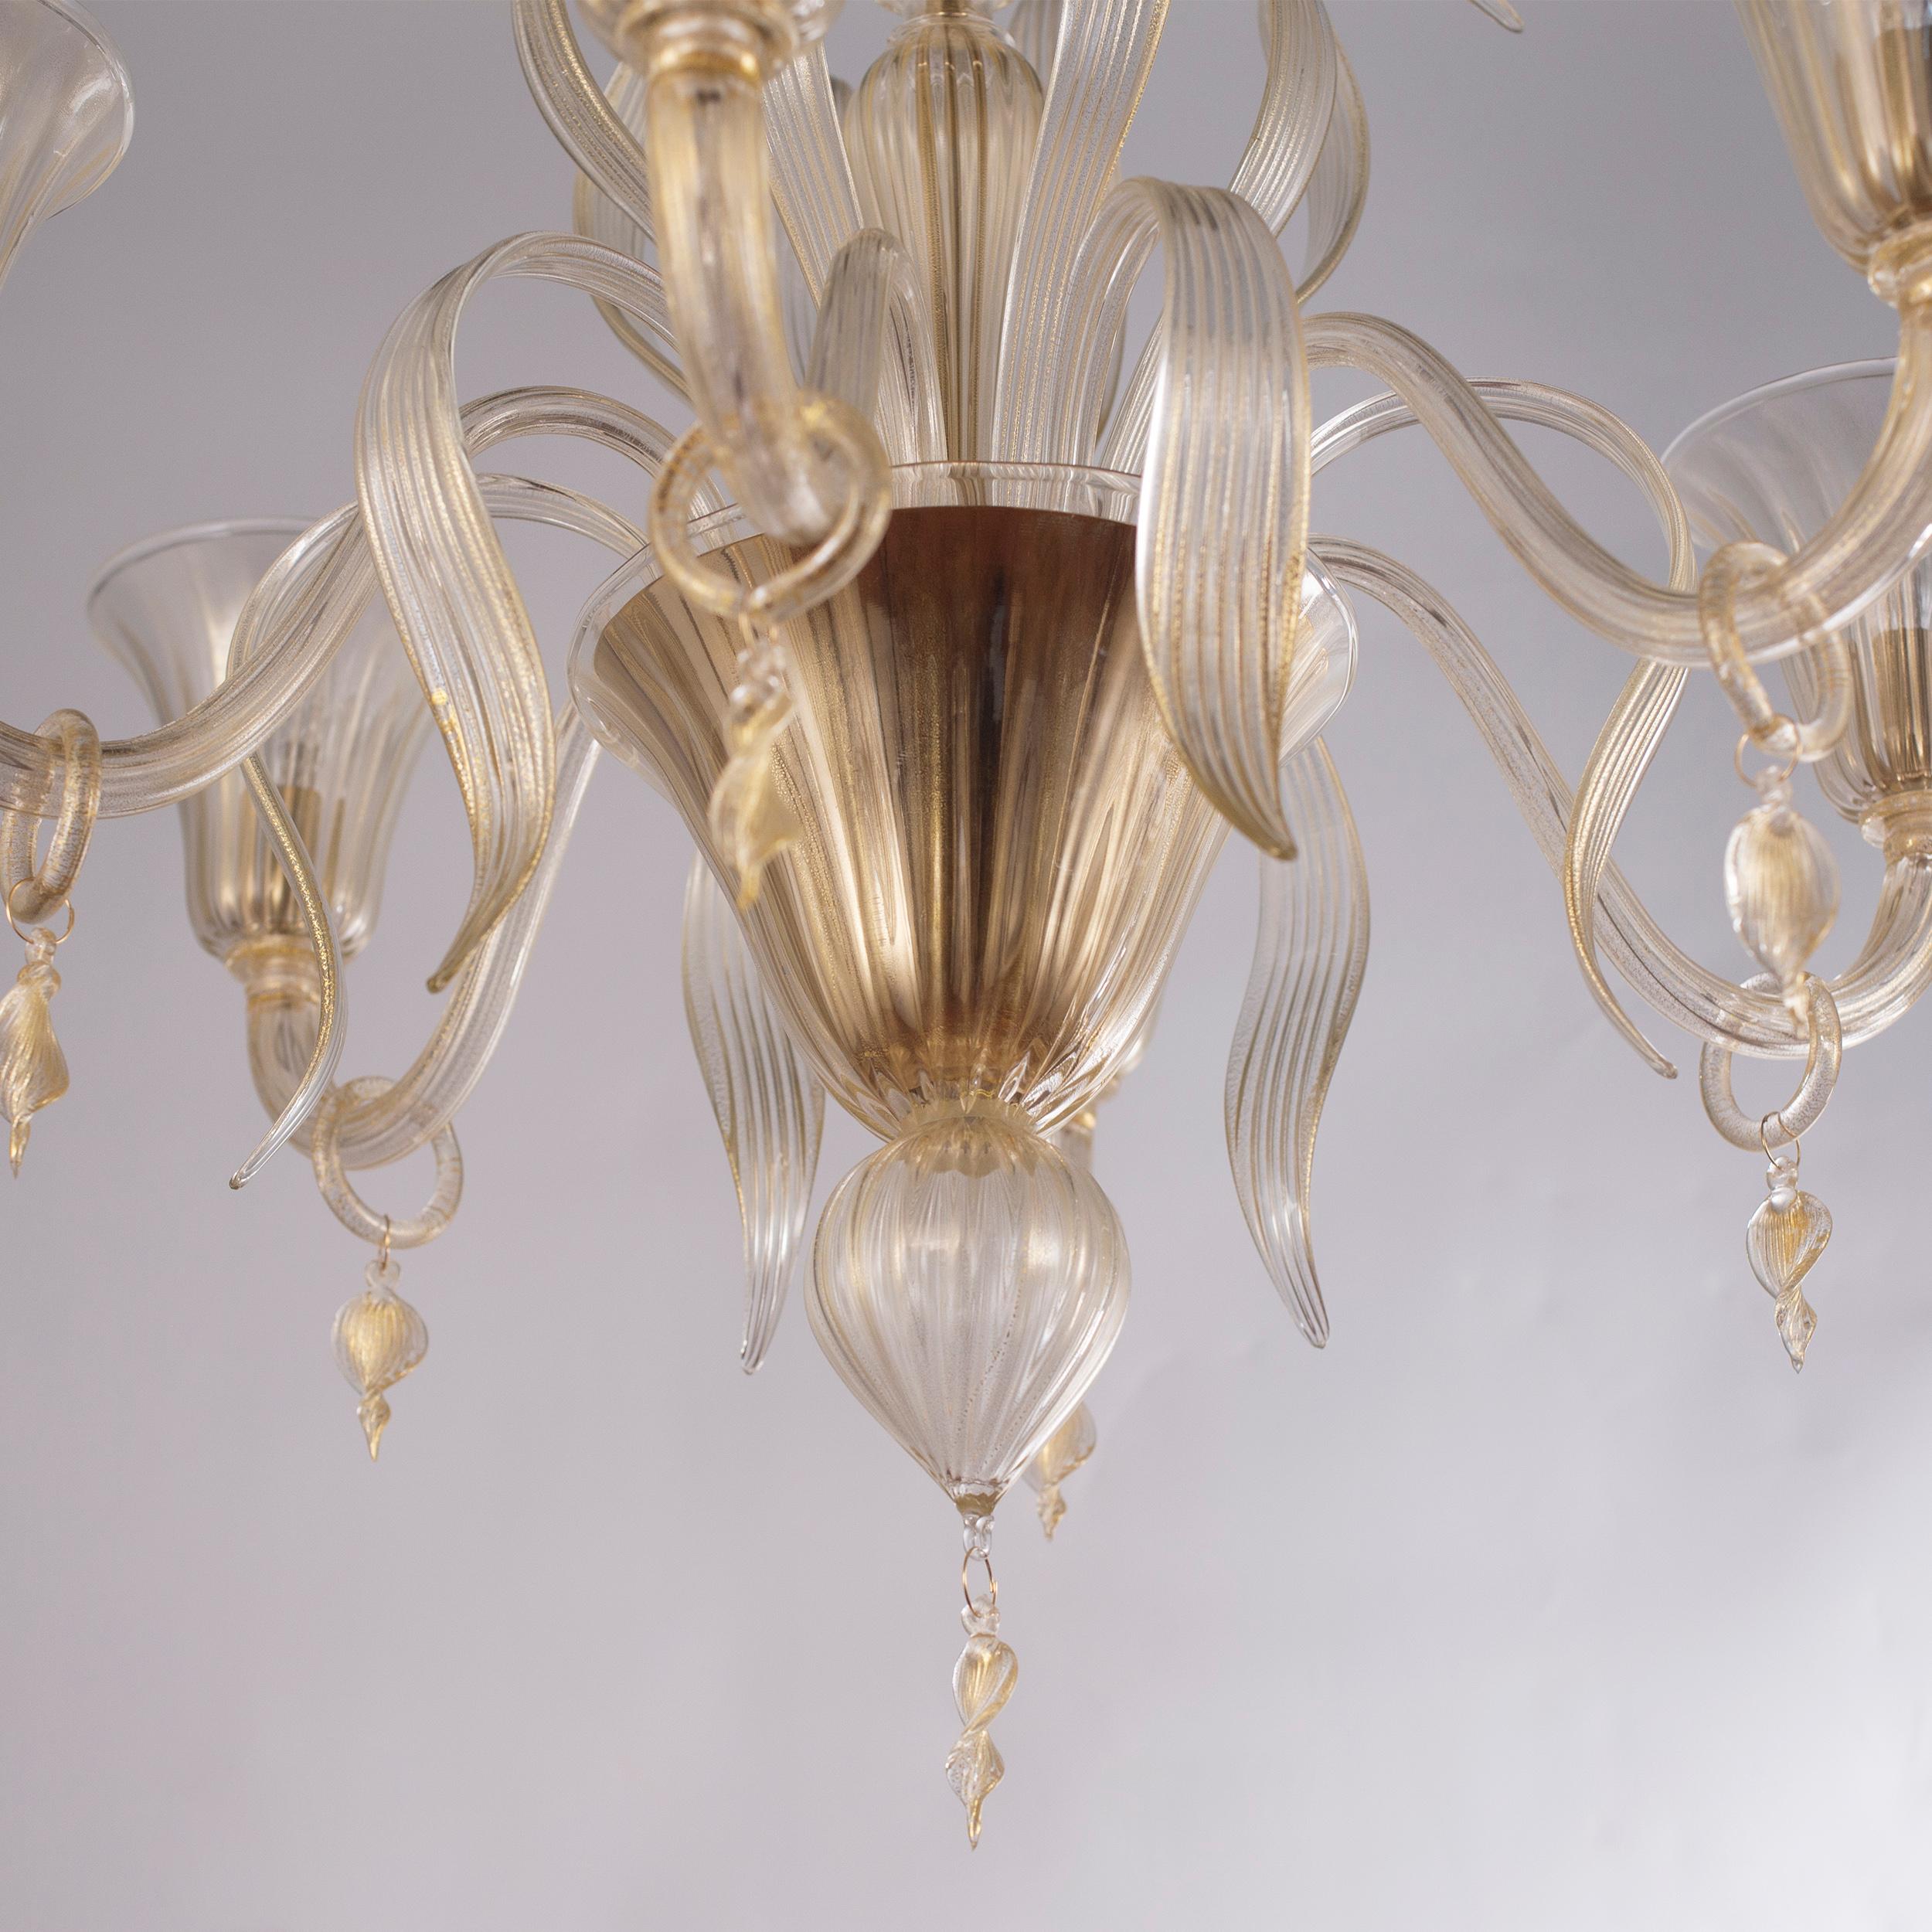 Italian Chandelier 6 arms Fluage, Gold Murano Glass by Multiforme In New Condition For Sale In Trebaseleghe, IT